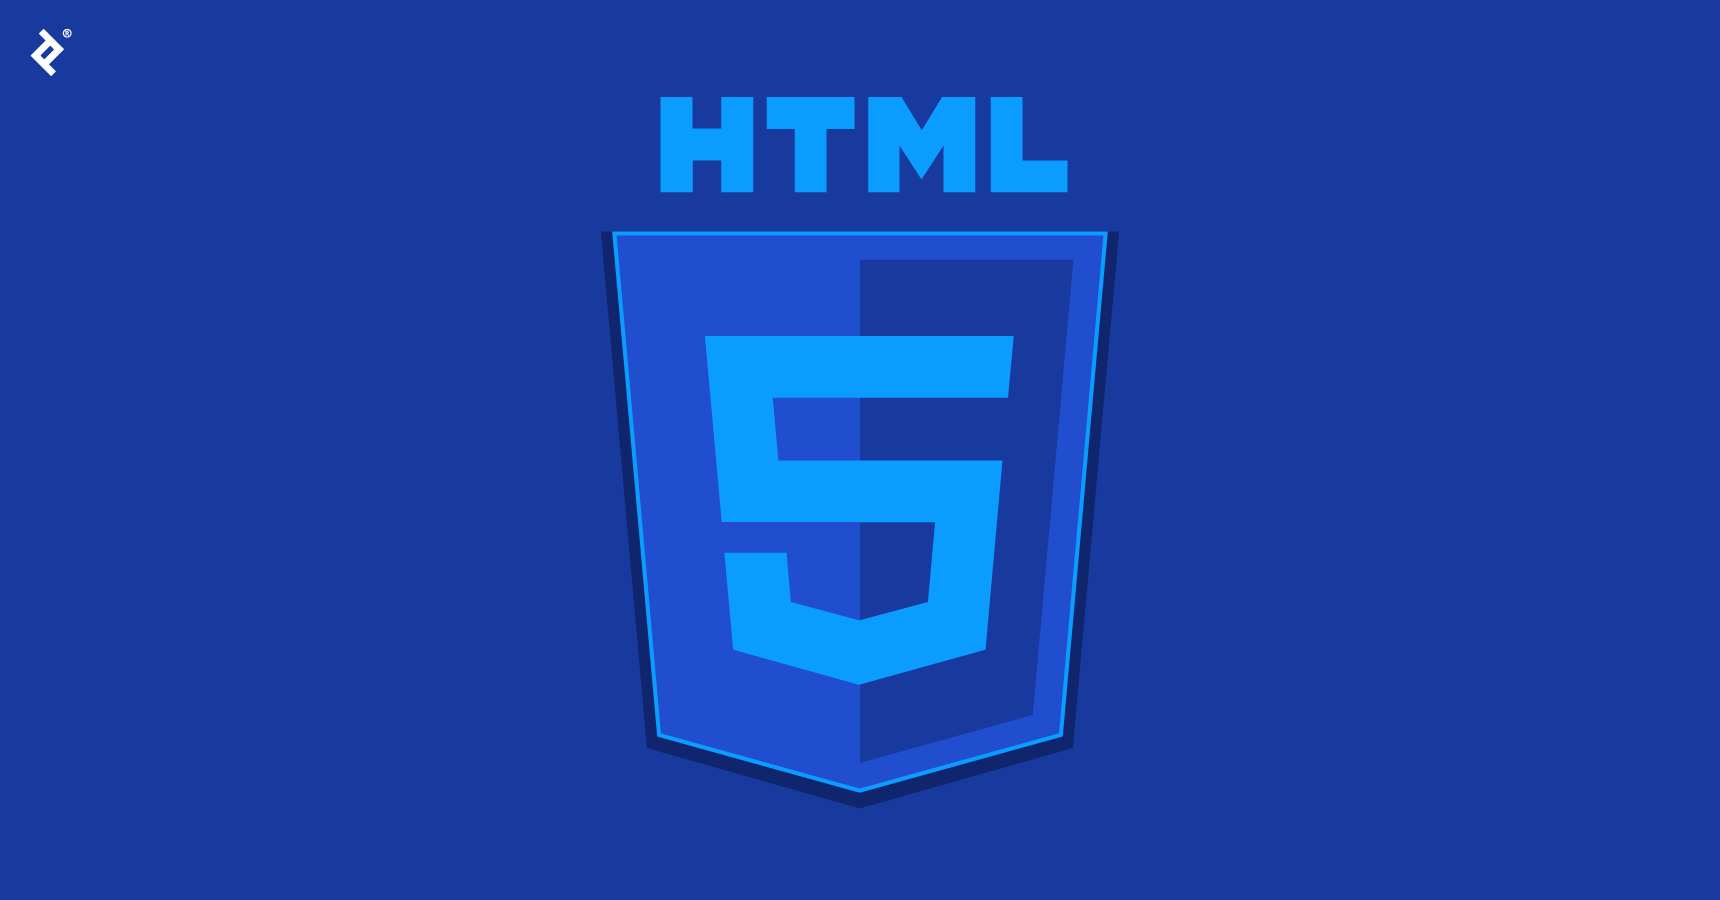 Old habits die hard. Start using new HTML5 semantic tags today.